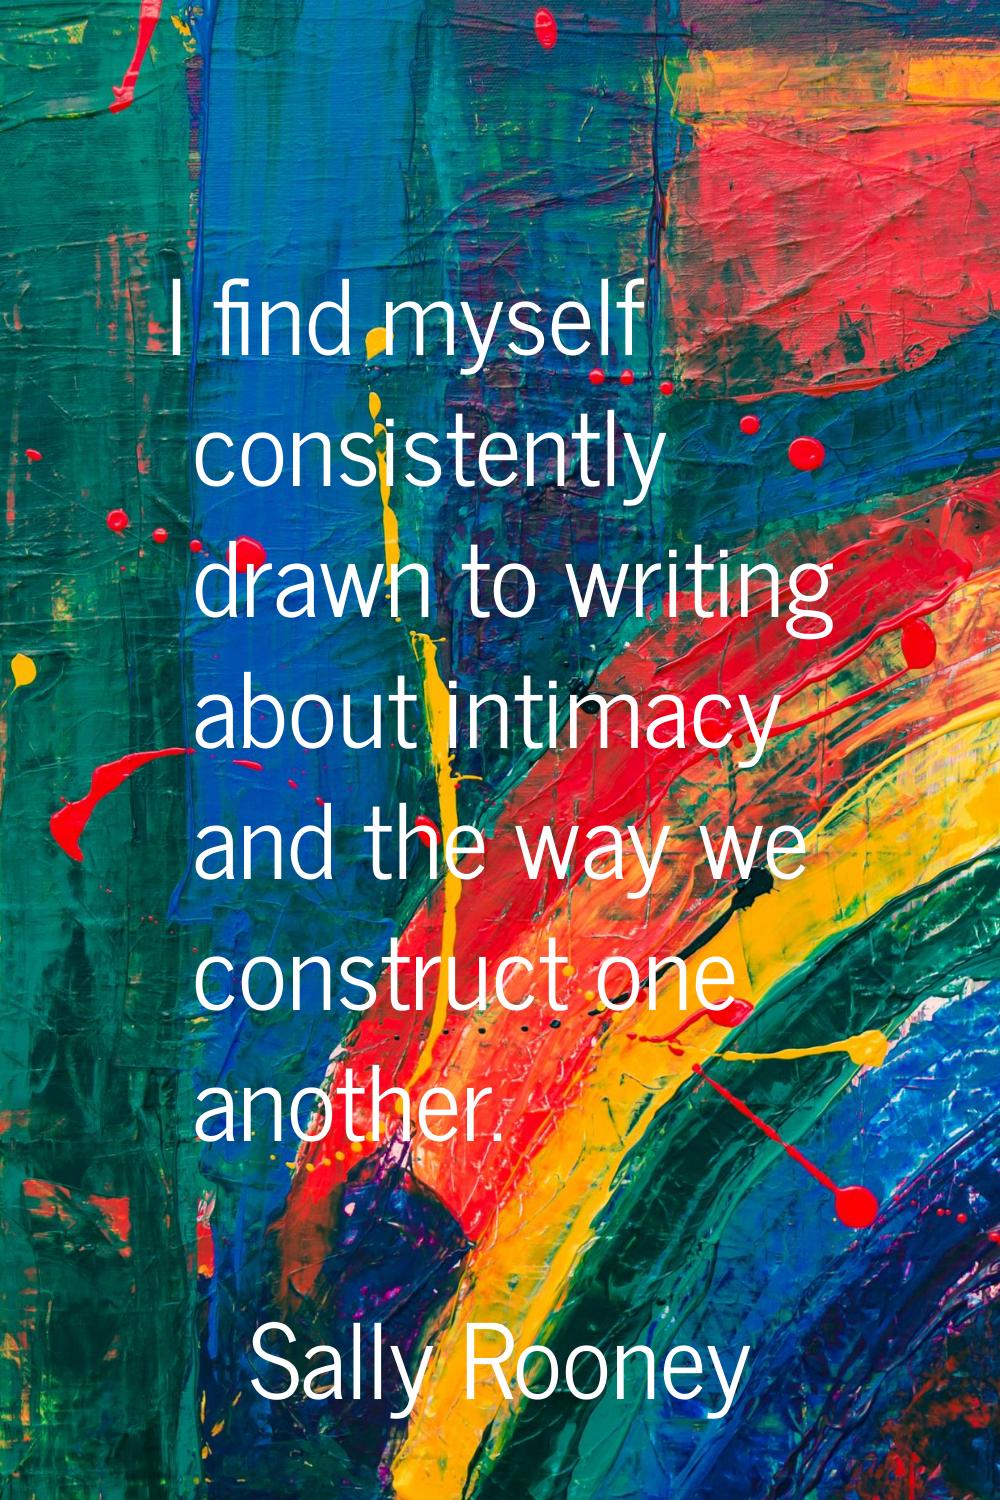 I find myself consistently drawn to writing about intimacy and the way we construct one another.